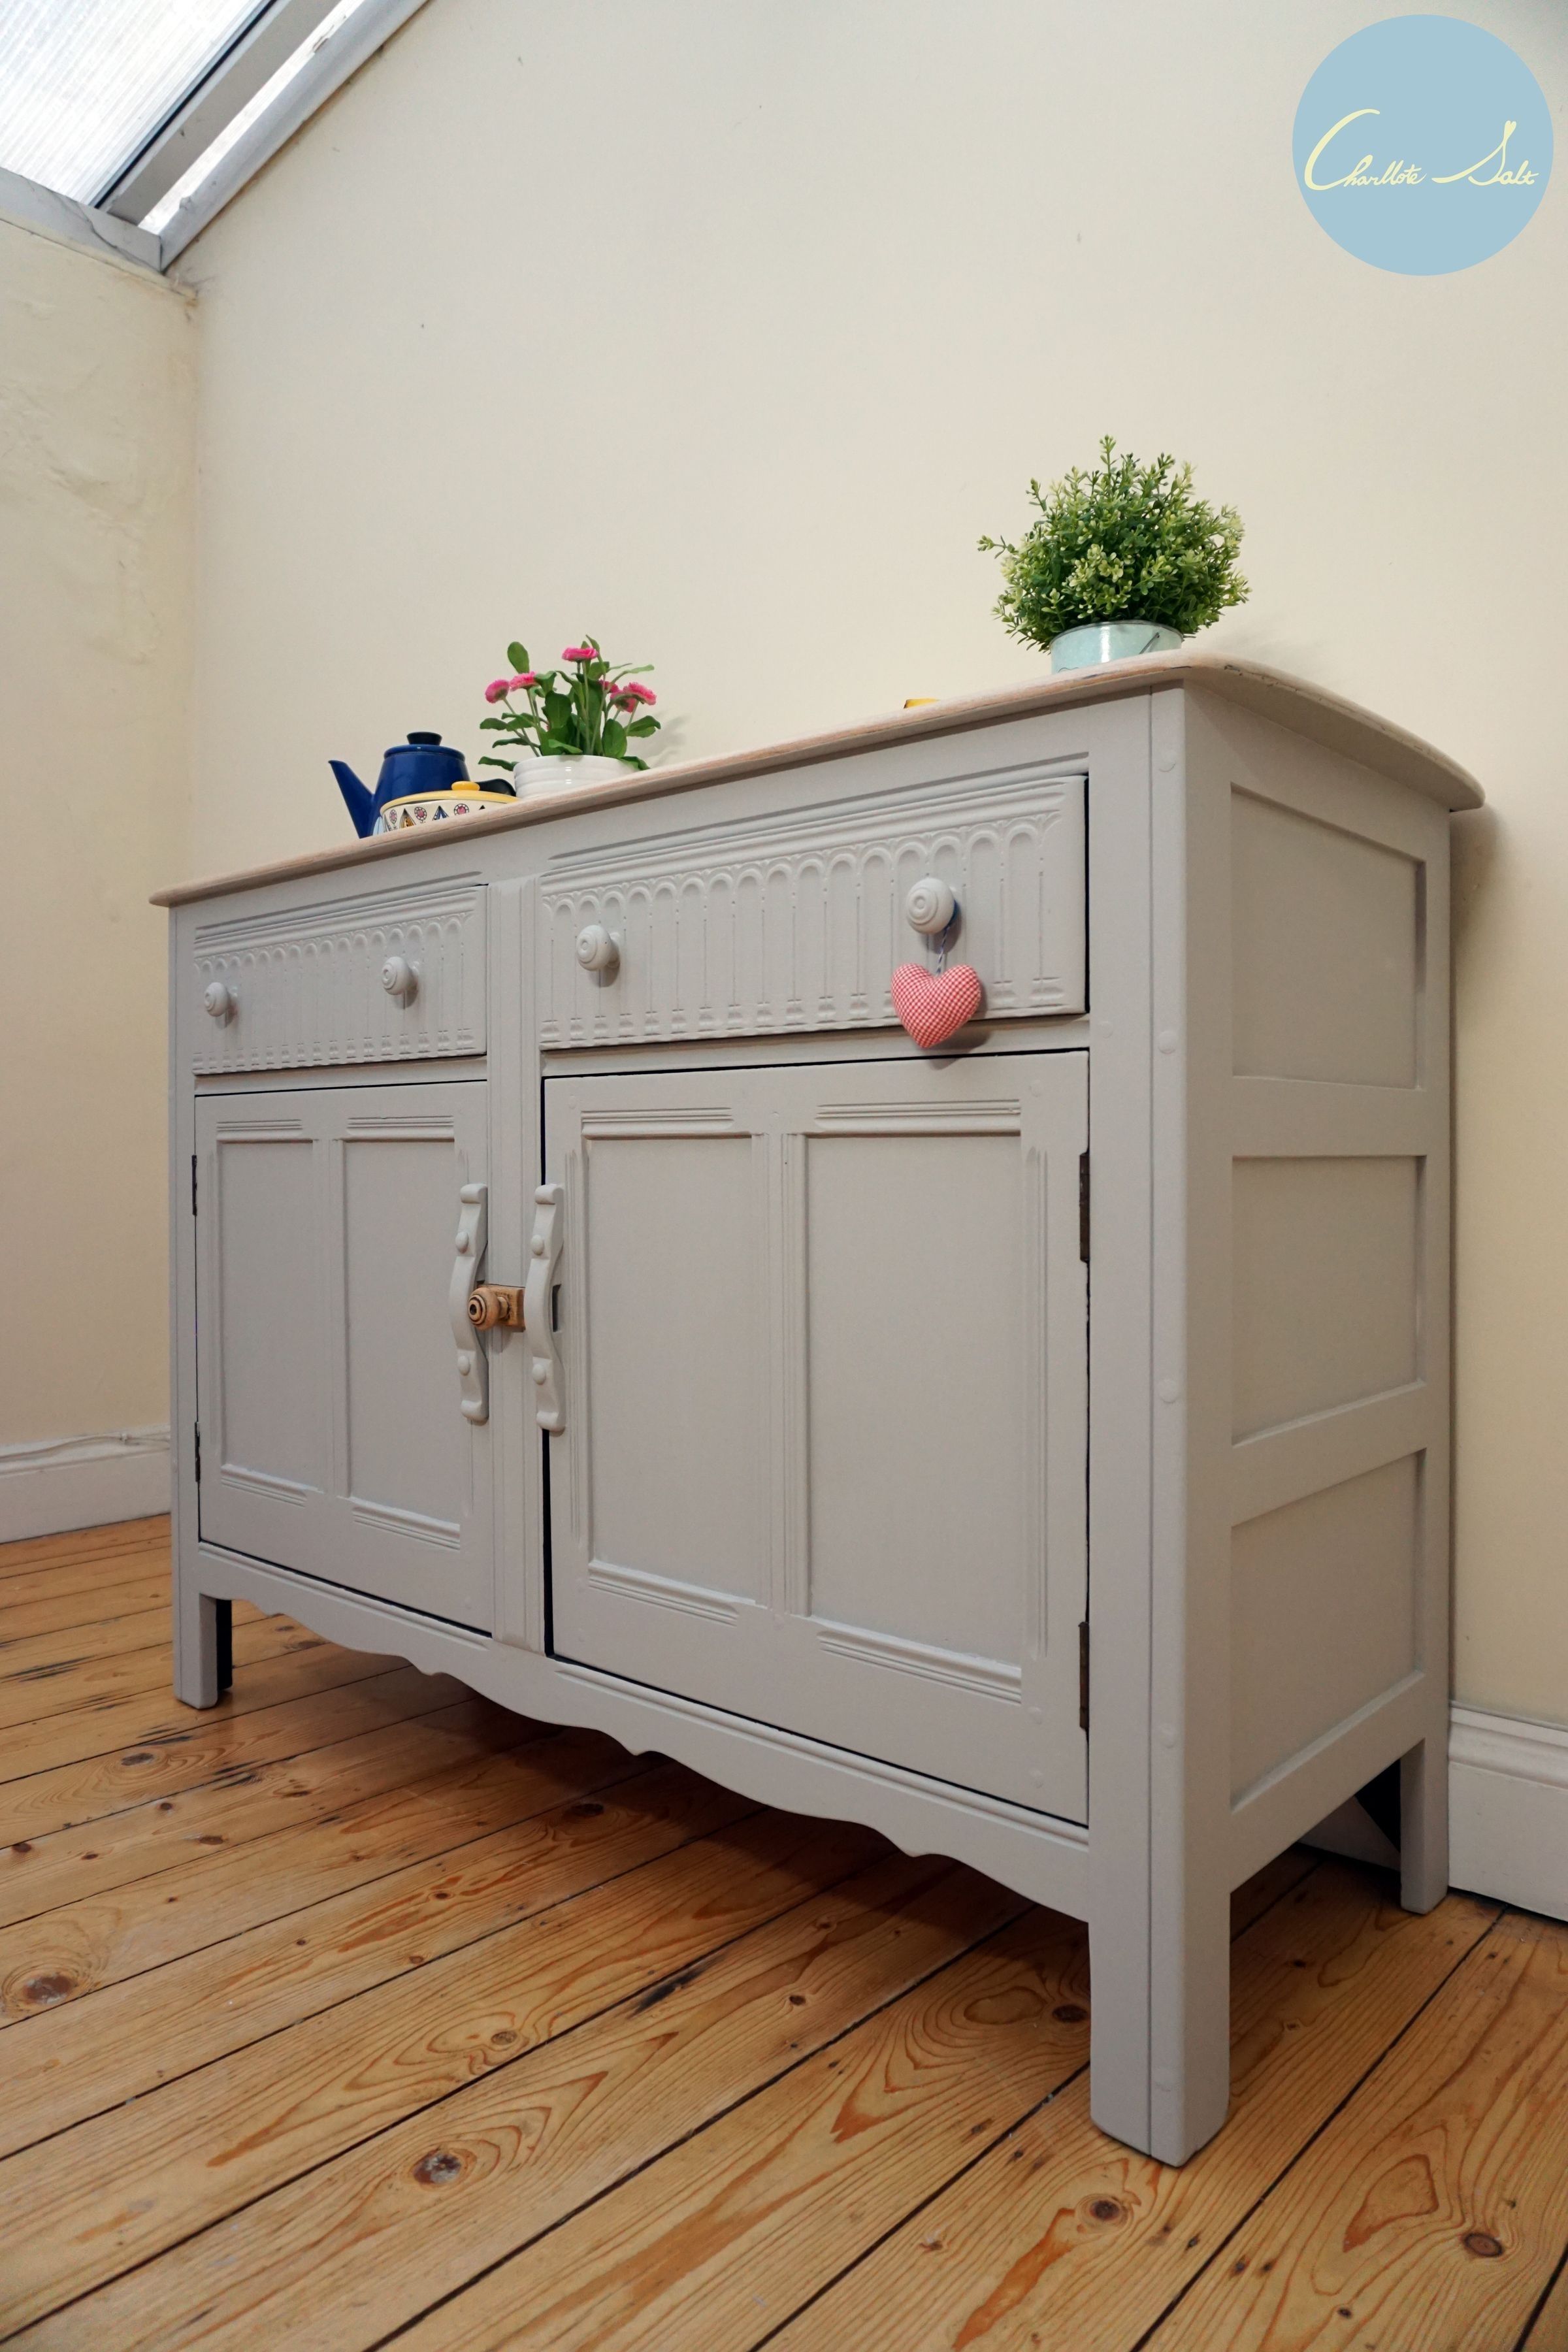 Ercol Sideboard Is Painted In Laura Ashley Dark Dove Grey And White For Oil Pale Finish 4 Door Sideboards (View 30 of 30)